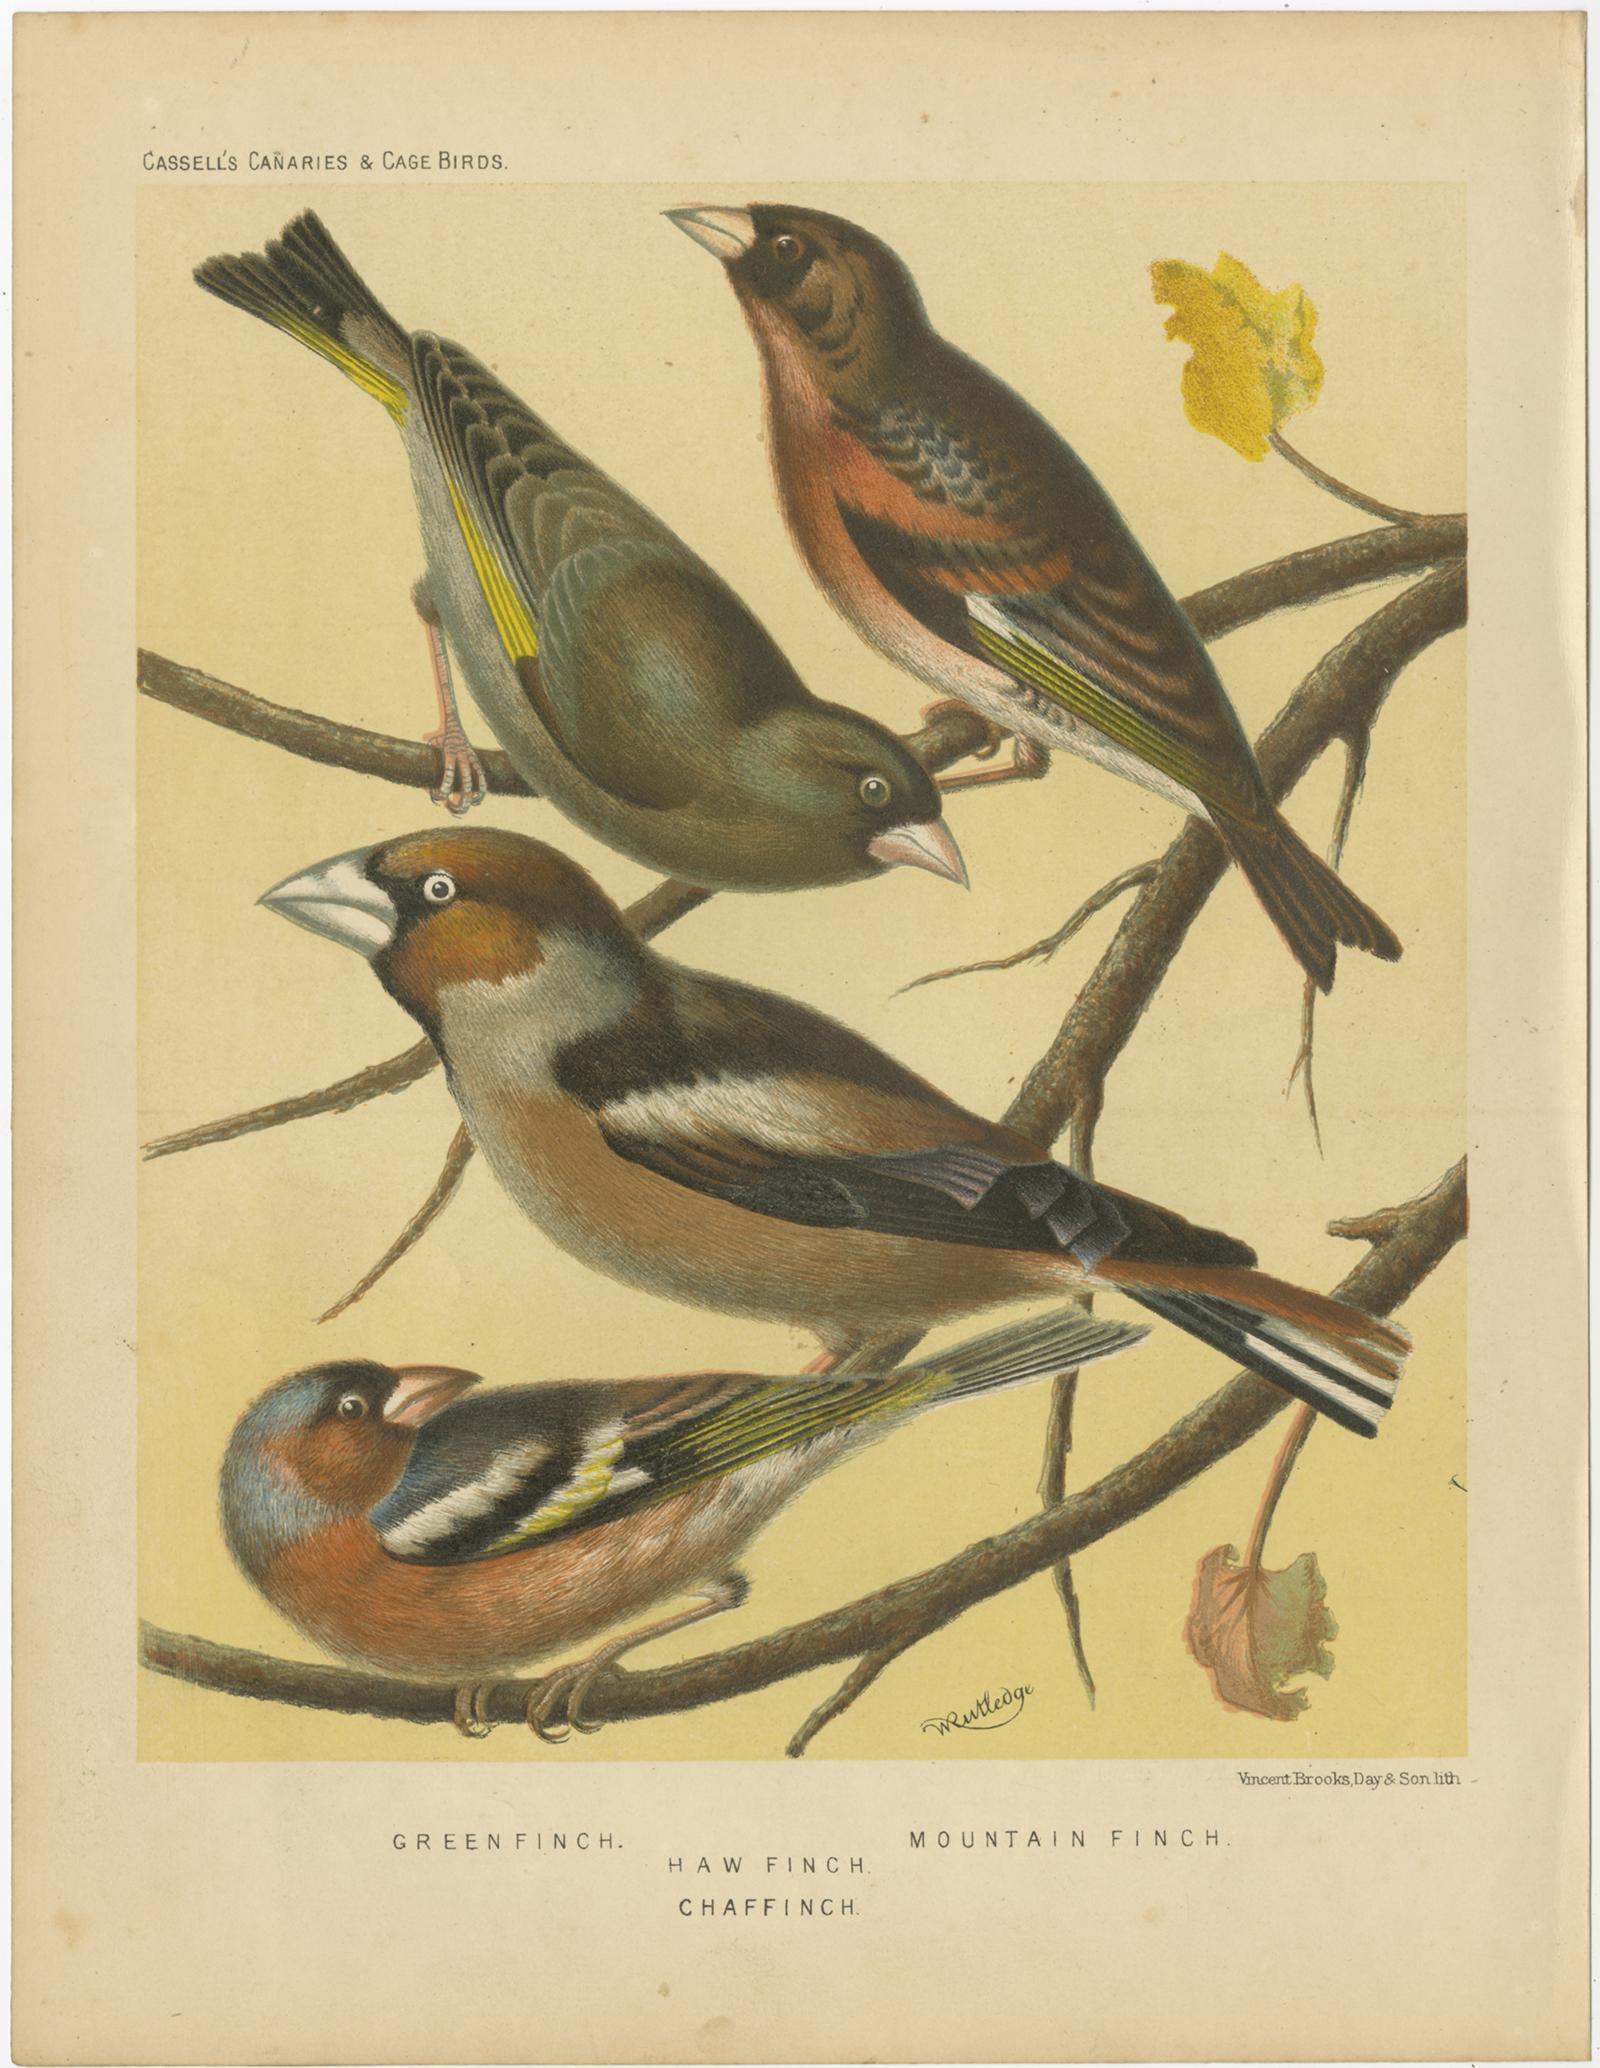 Antique bird print titled 'Greenfinch, Haw Finch, Mountain Finch, Chaffinch' Old bird print depicting the Greenfinch, Haw Finch, Mountain Finch and Chaffinch. This print originates from: 'Illustrated book of canaries and cage-birds' by W. A.